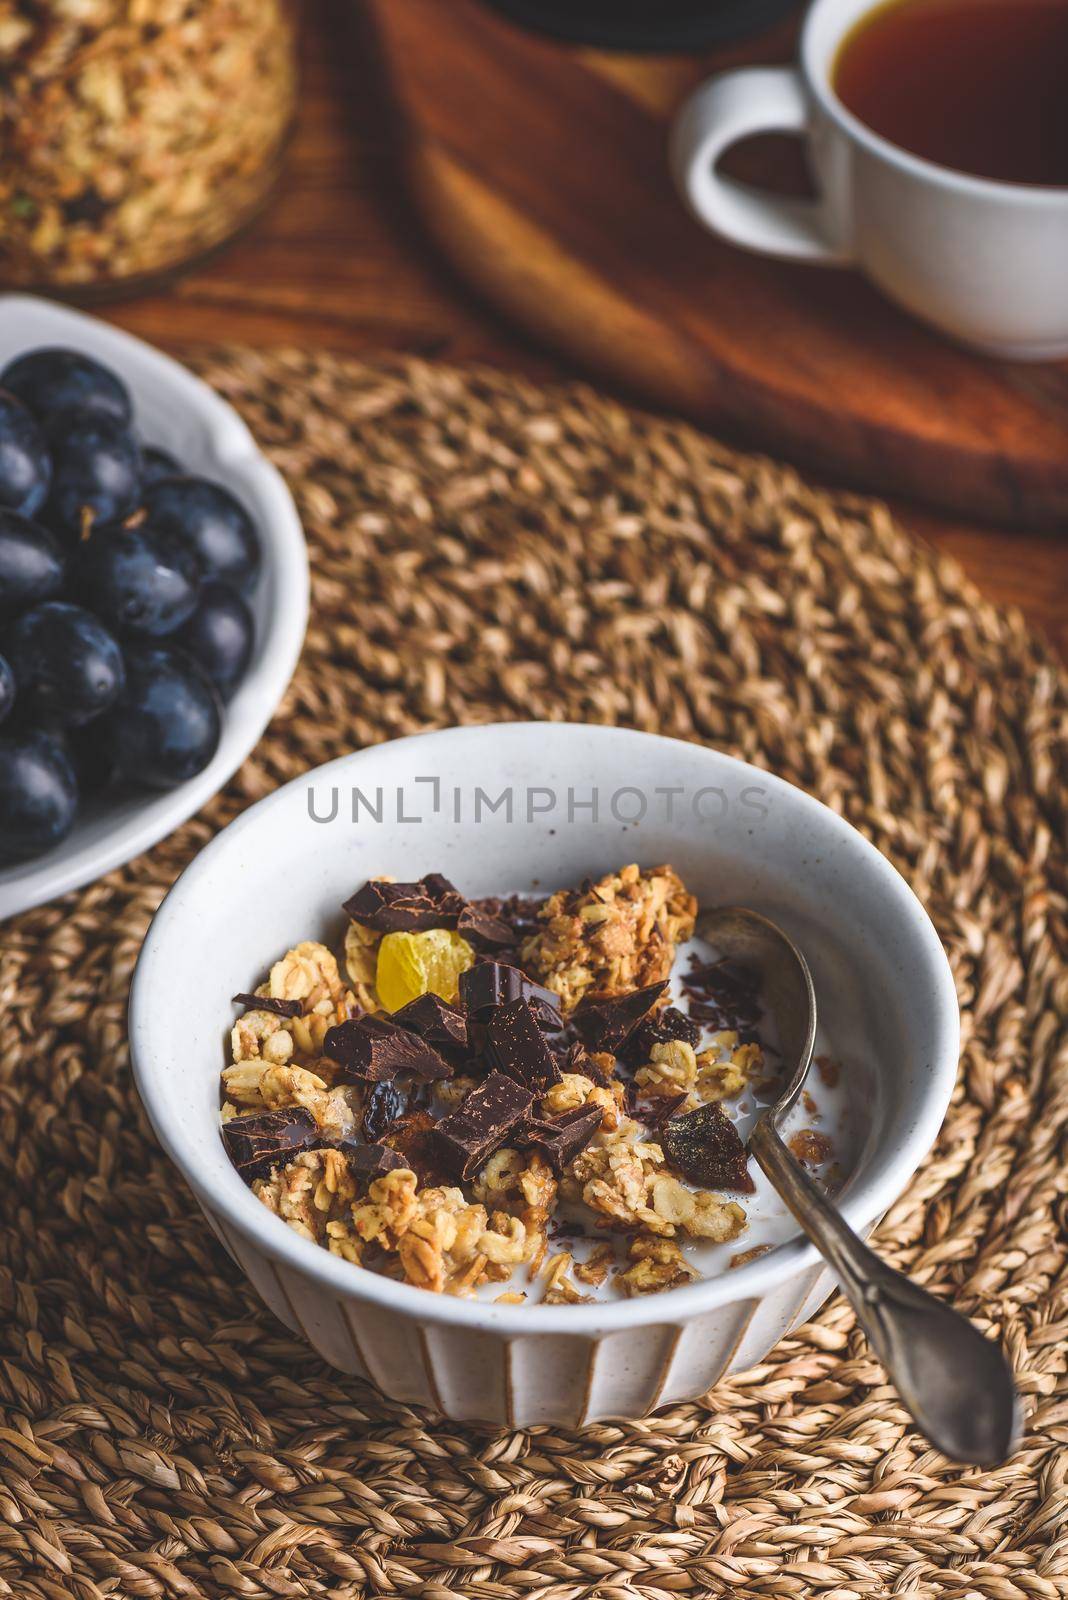 Bowl of Granola with Chocolate for Breakfast by Seva_blsv